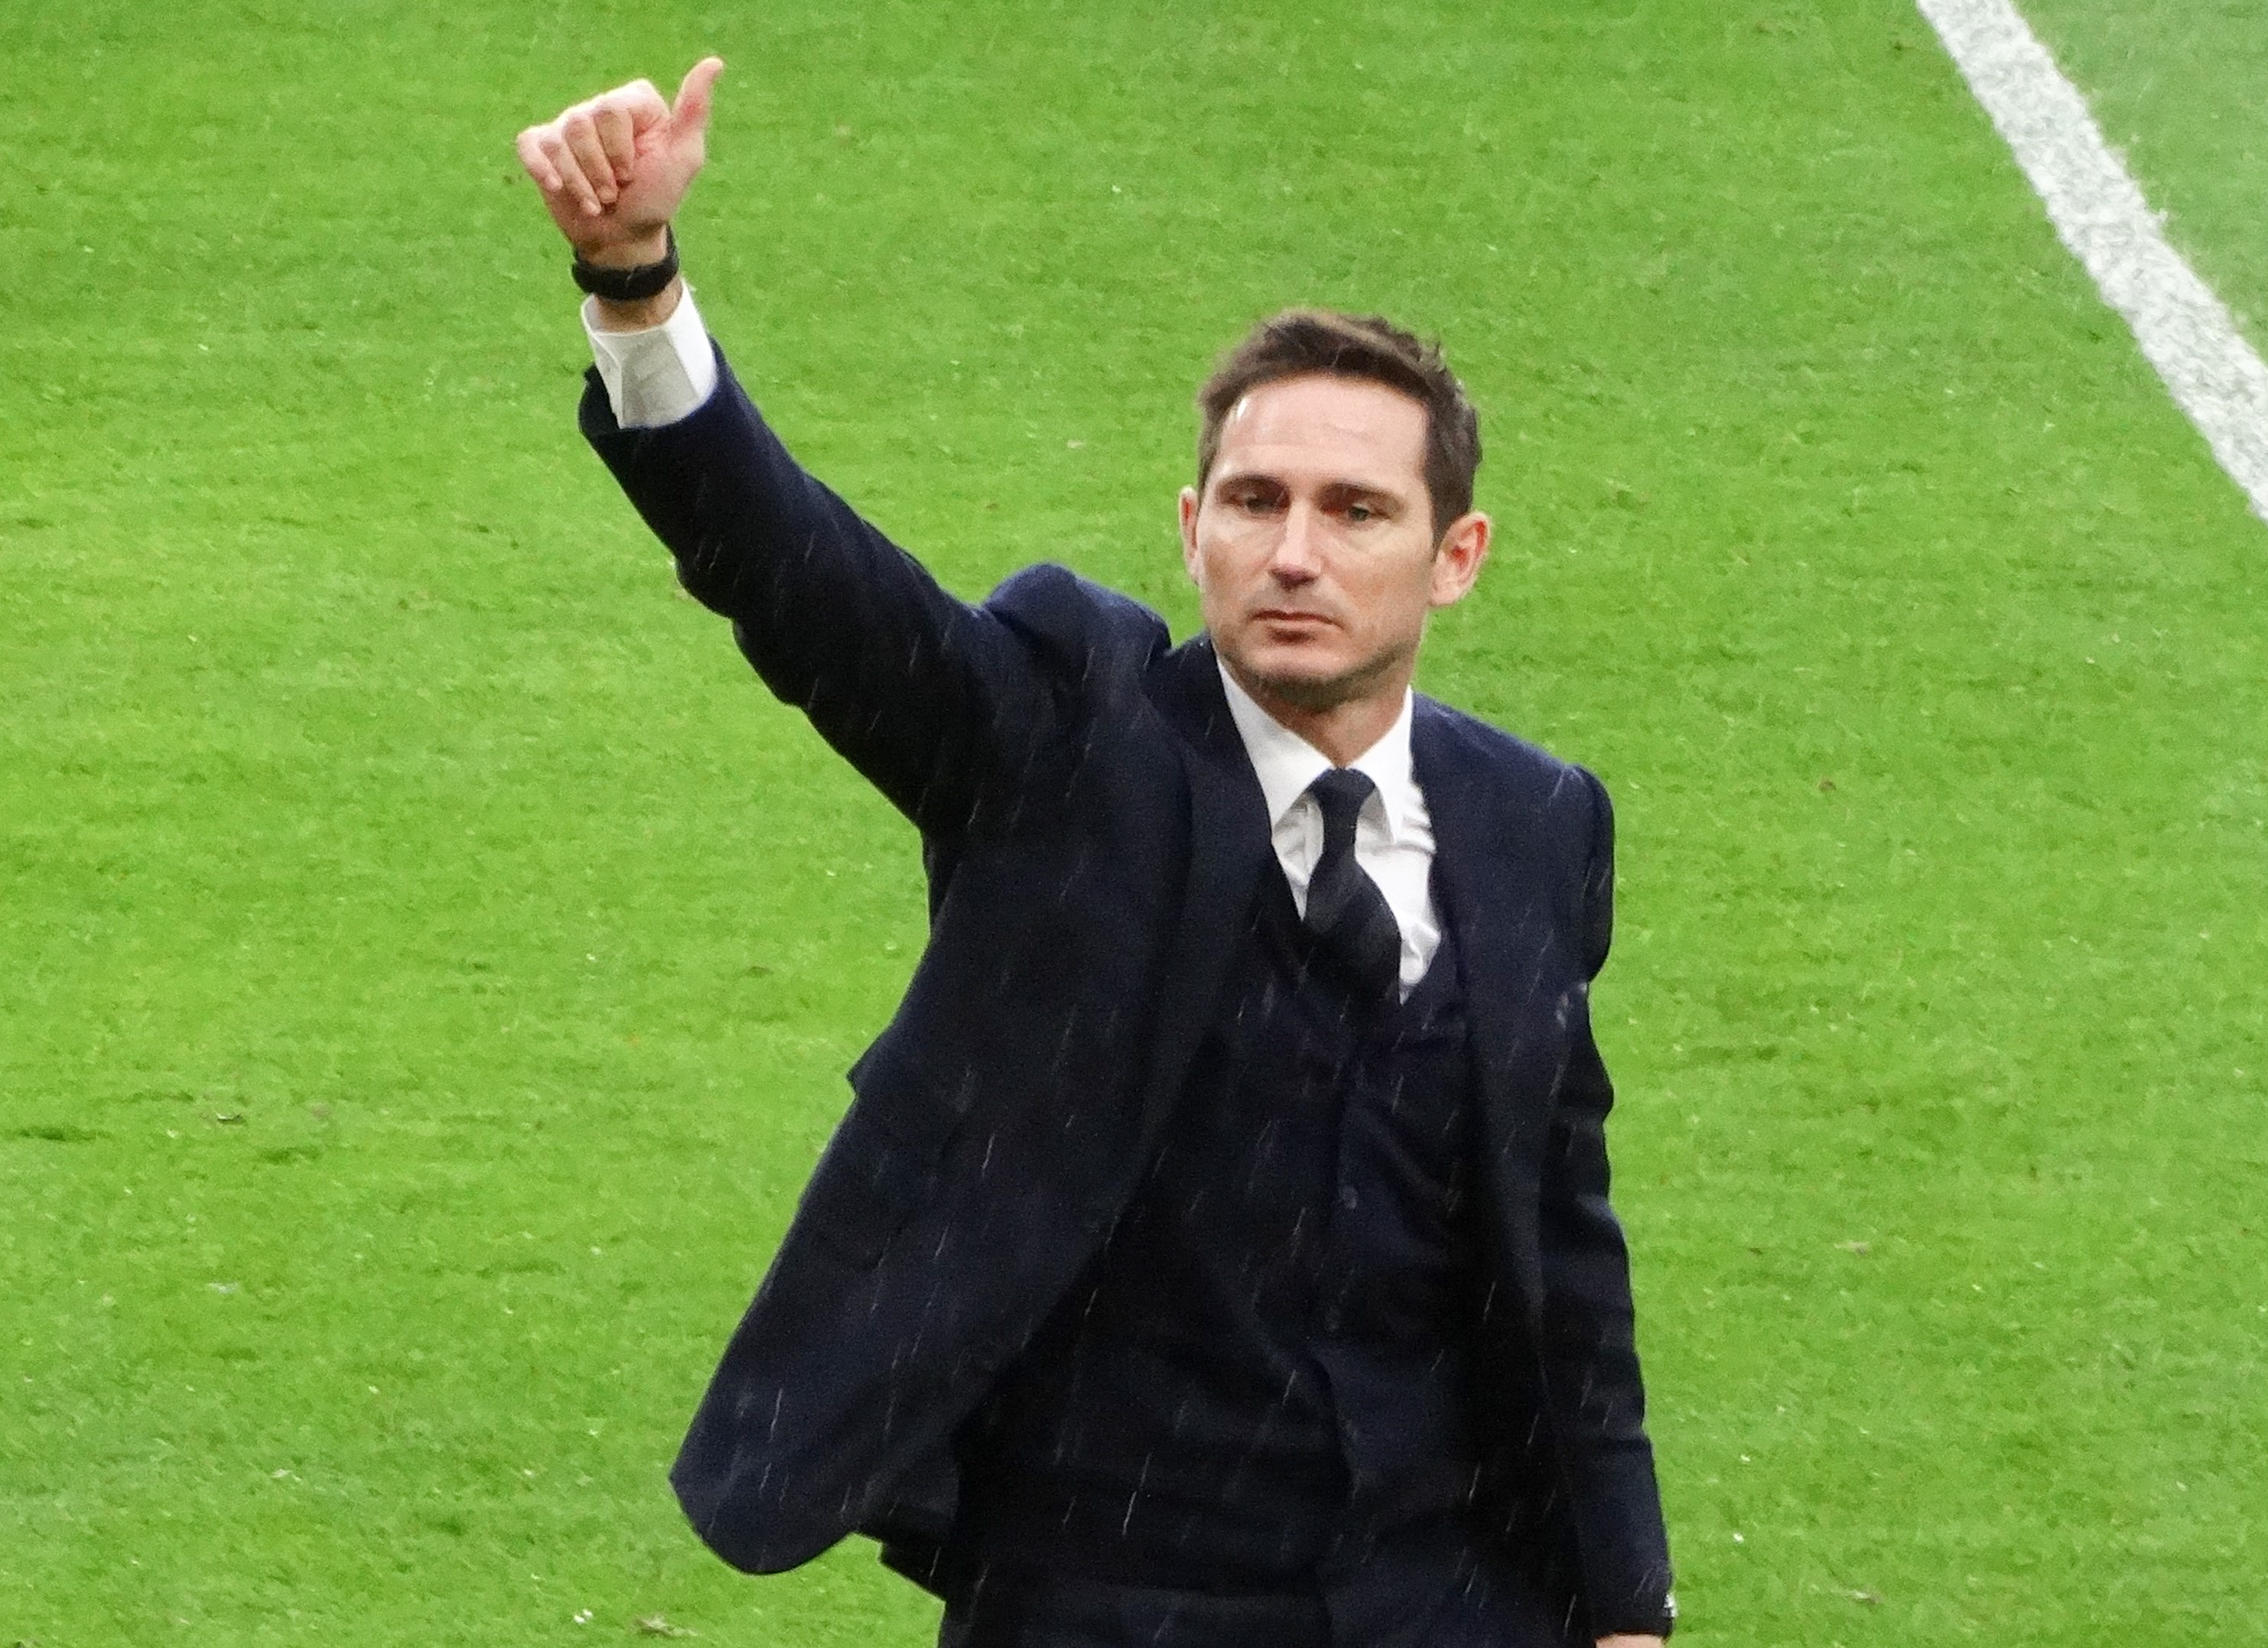 UPDATE 1-Lampard returns to Chelsea as manager after impressive Derby audition